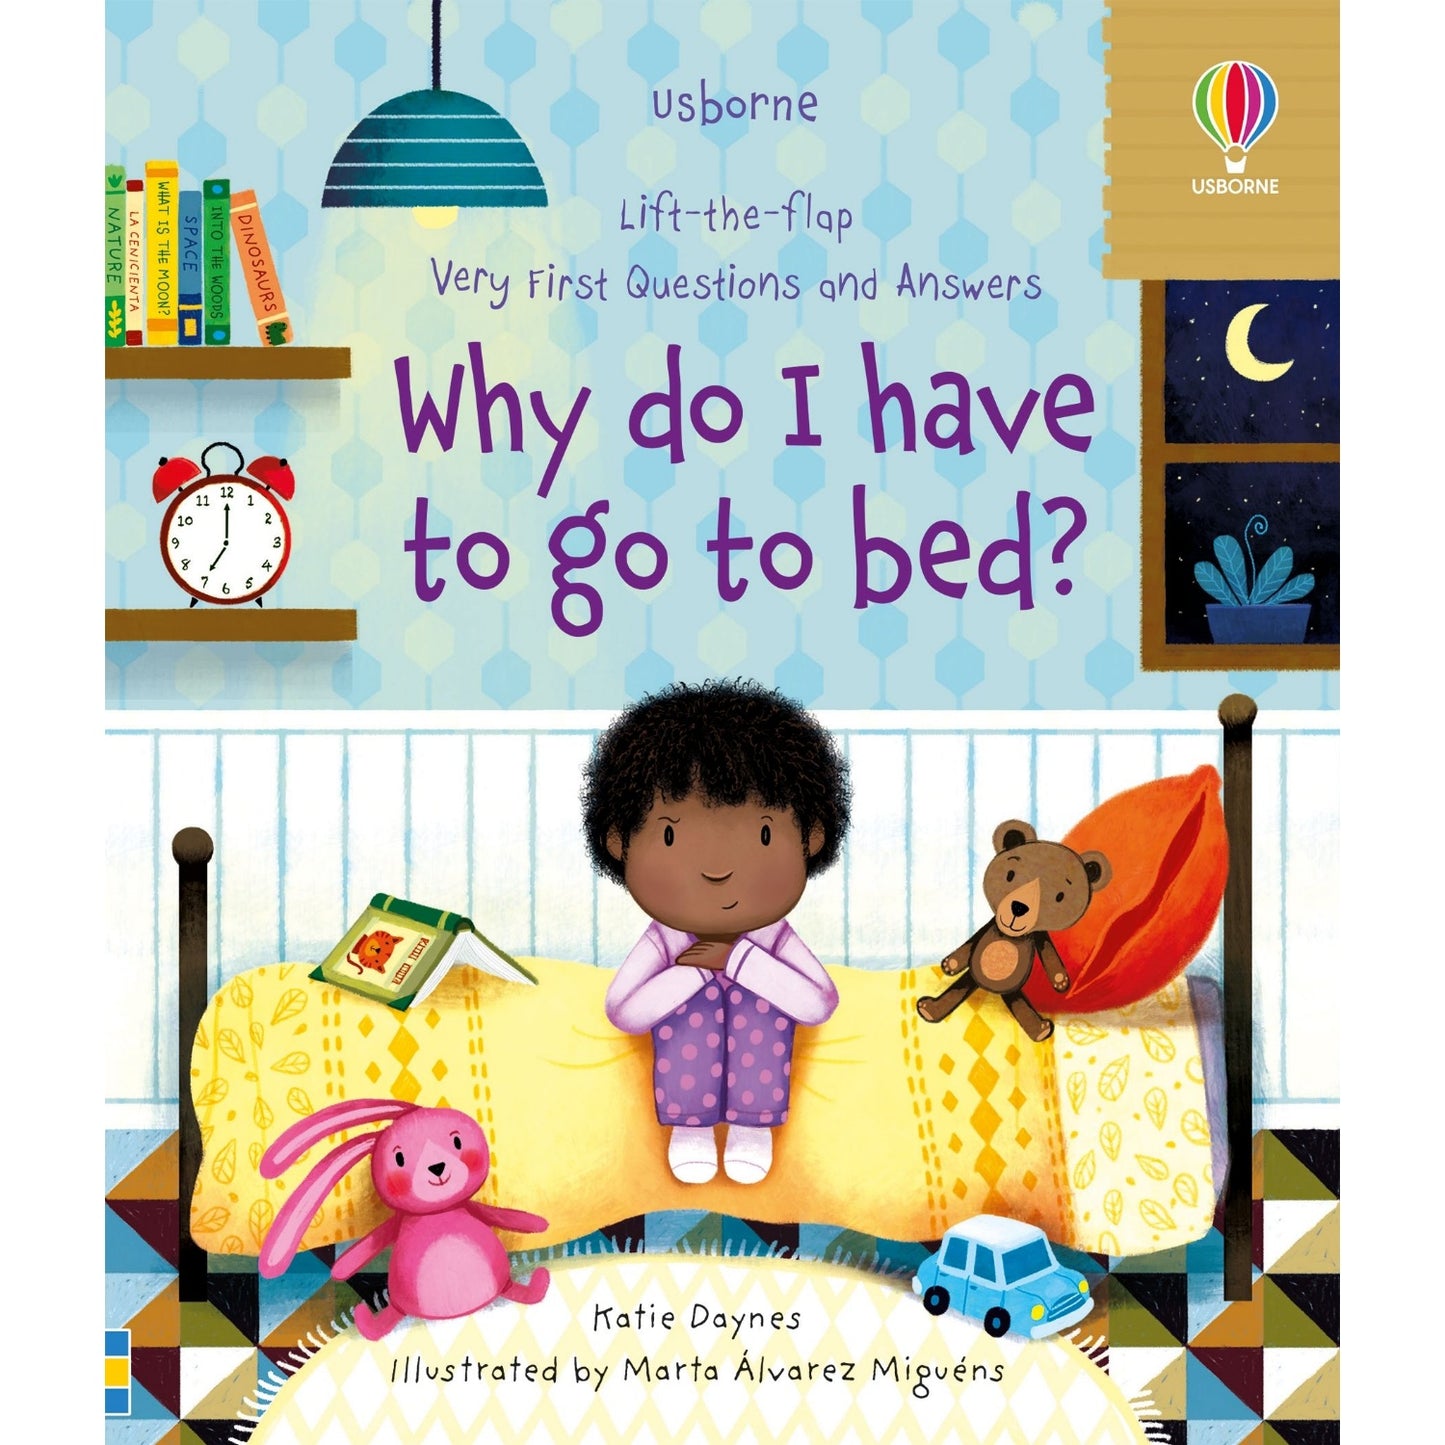 Why do I have to go to bed? - Very First Questions & Answers Lift-the-Flap Board Book